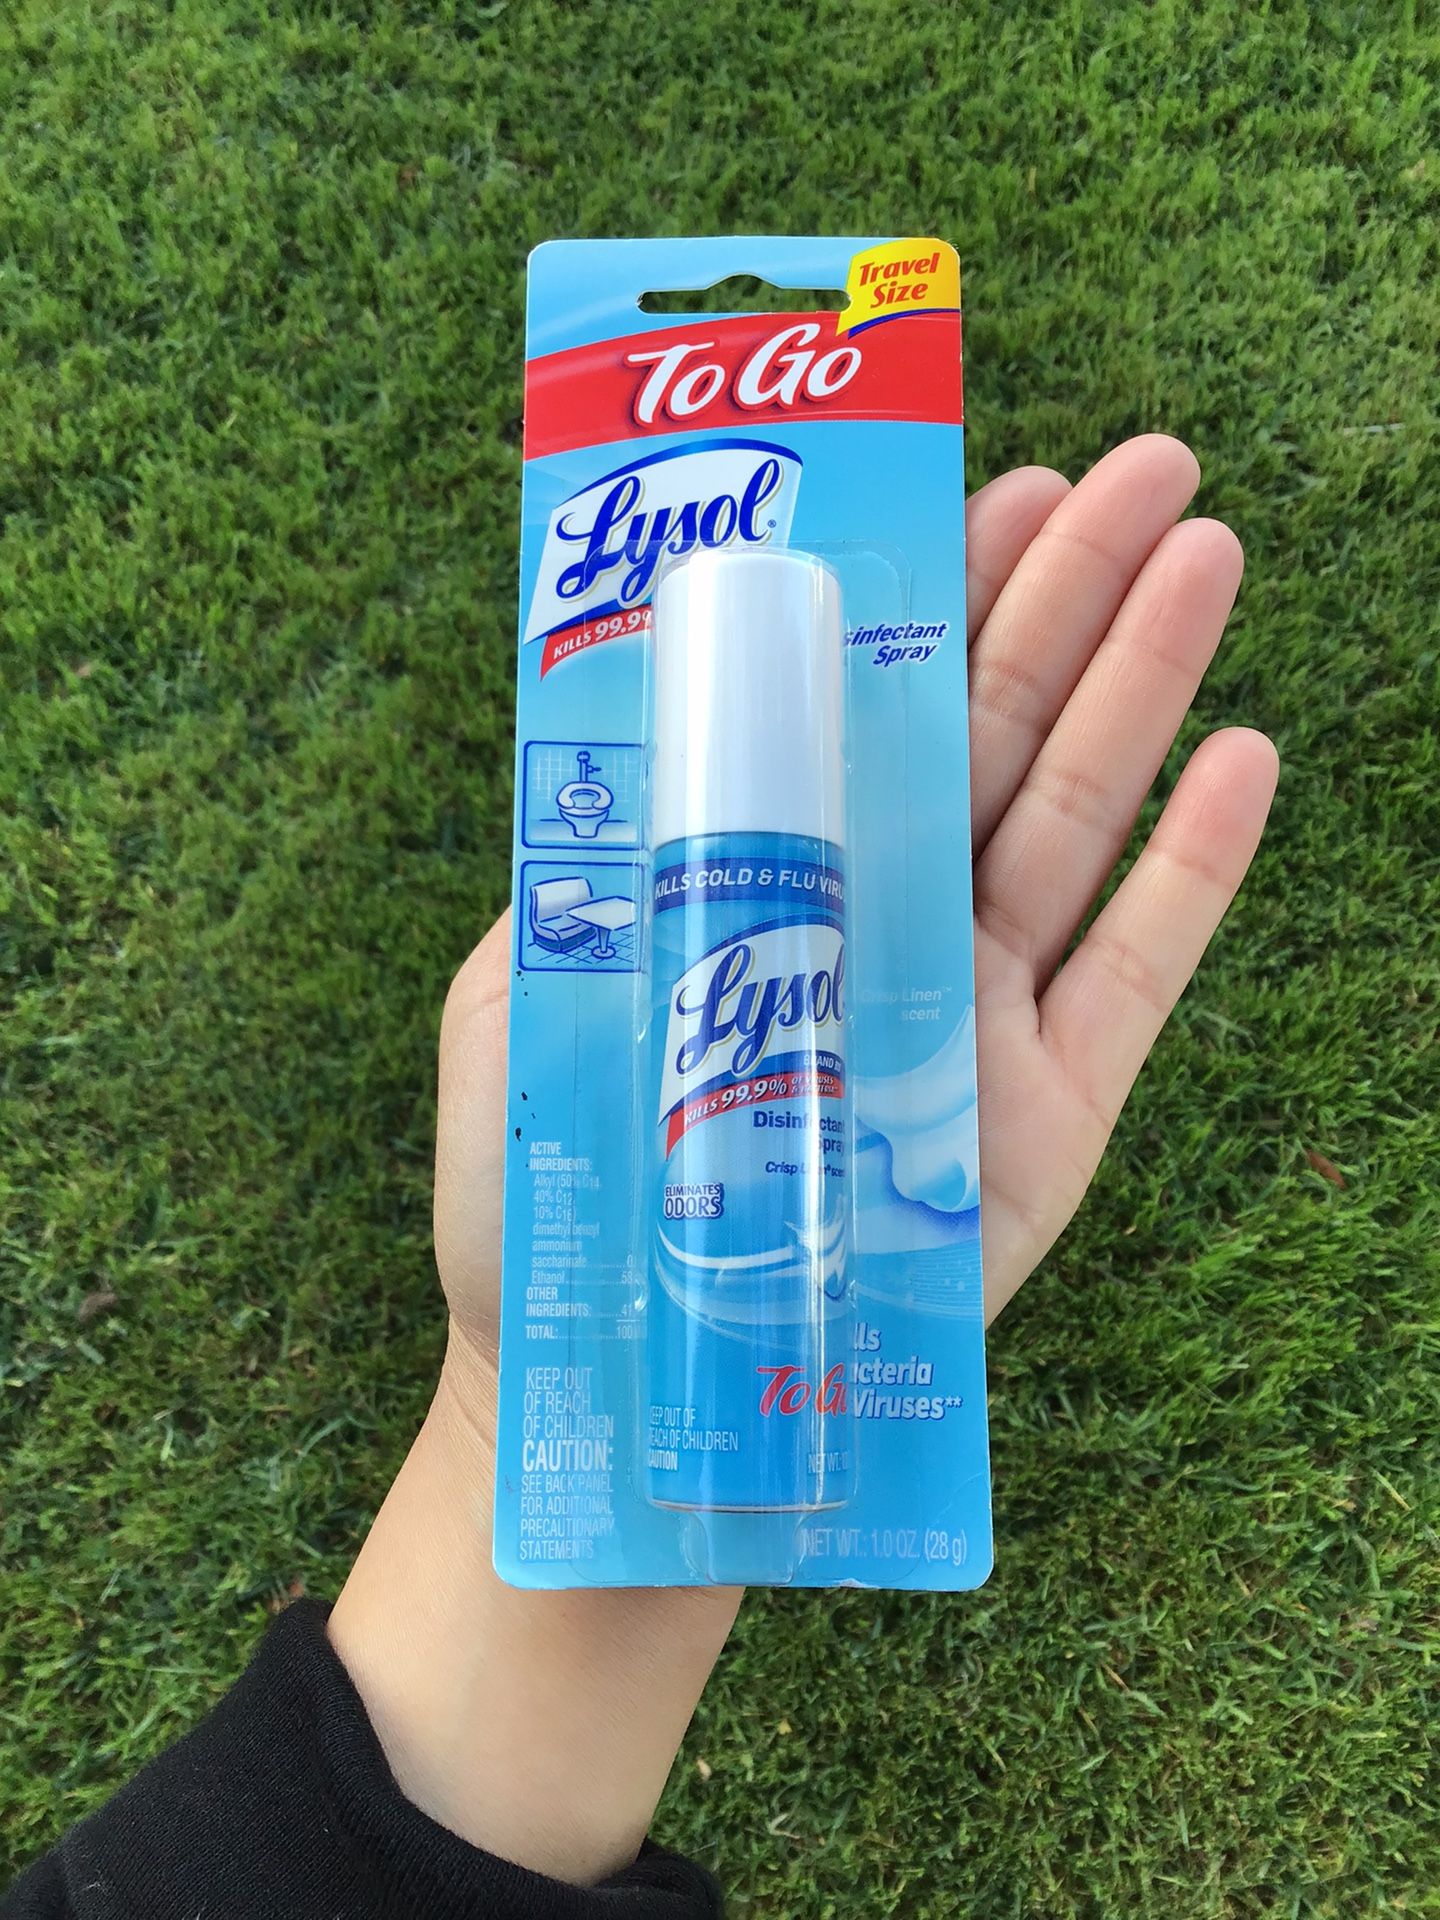 Lysol To Go Travel Size Lysol Disinfectant Kills Bacteria Spray Home Kitchen Bathroom Portable Cleaning Spray 